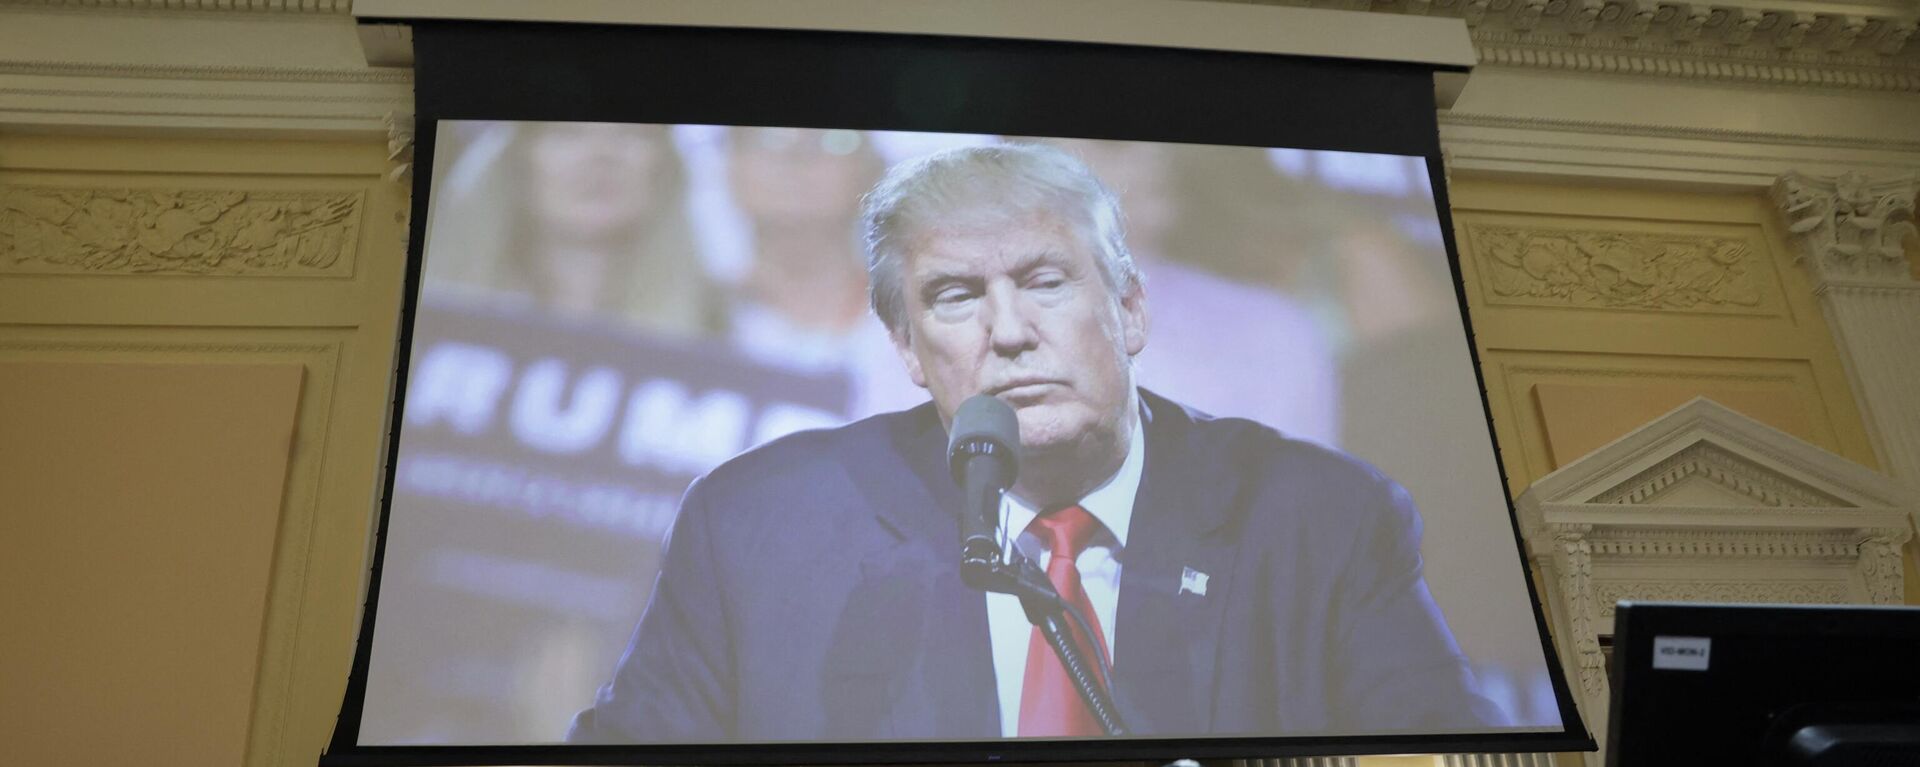 Former U.S. President Donald Trump appears on a video screen during the fourth hearing on the January 6th investigation in the Cannon House Office Building on June 21, 2022 in Washington, DC. - Sputnik International, 1920, 22.06.2022